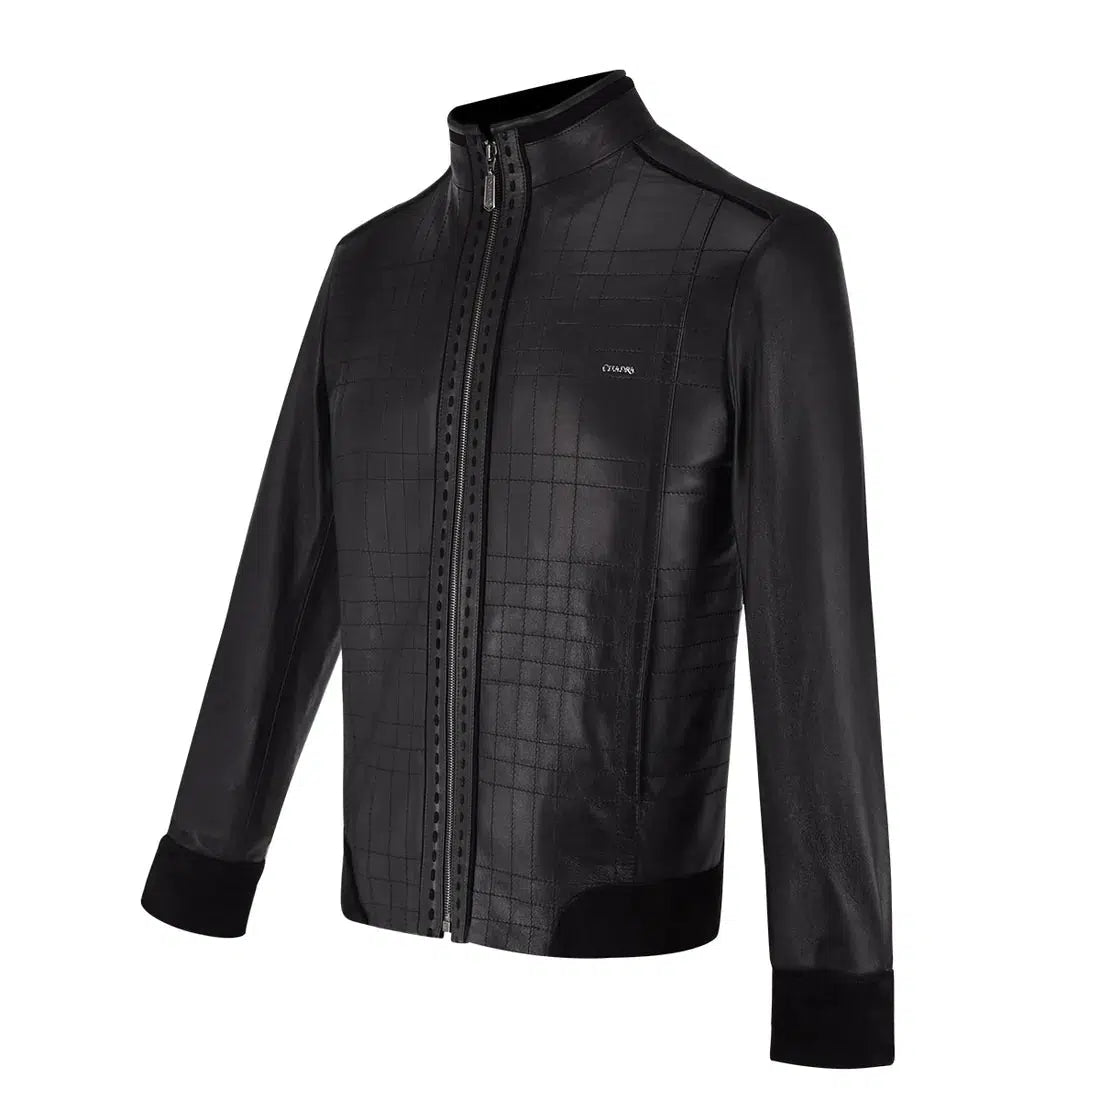 H293BOA - Cuadra black casual fashion quilted ovine leather jacket for men-Kuet.us - Cuadra Boots - Western Cowboy, Casual Fashion and Dress Boots